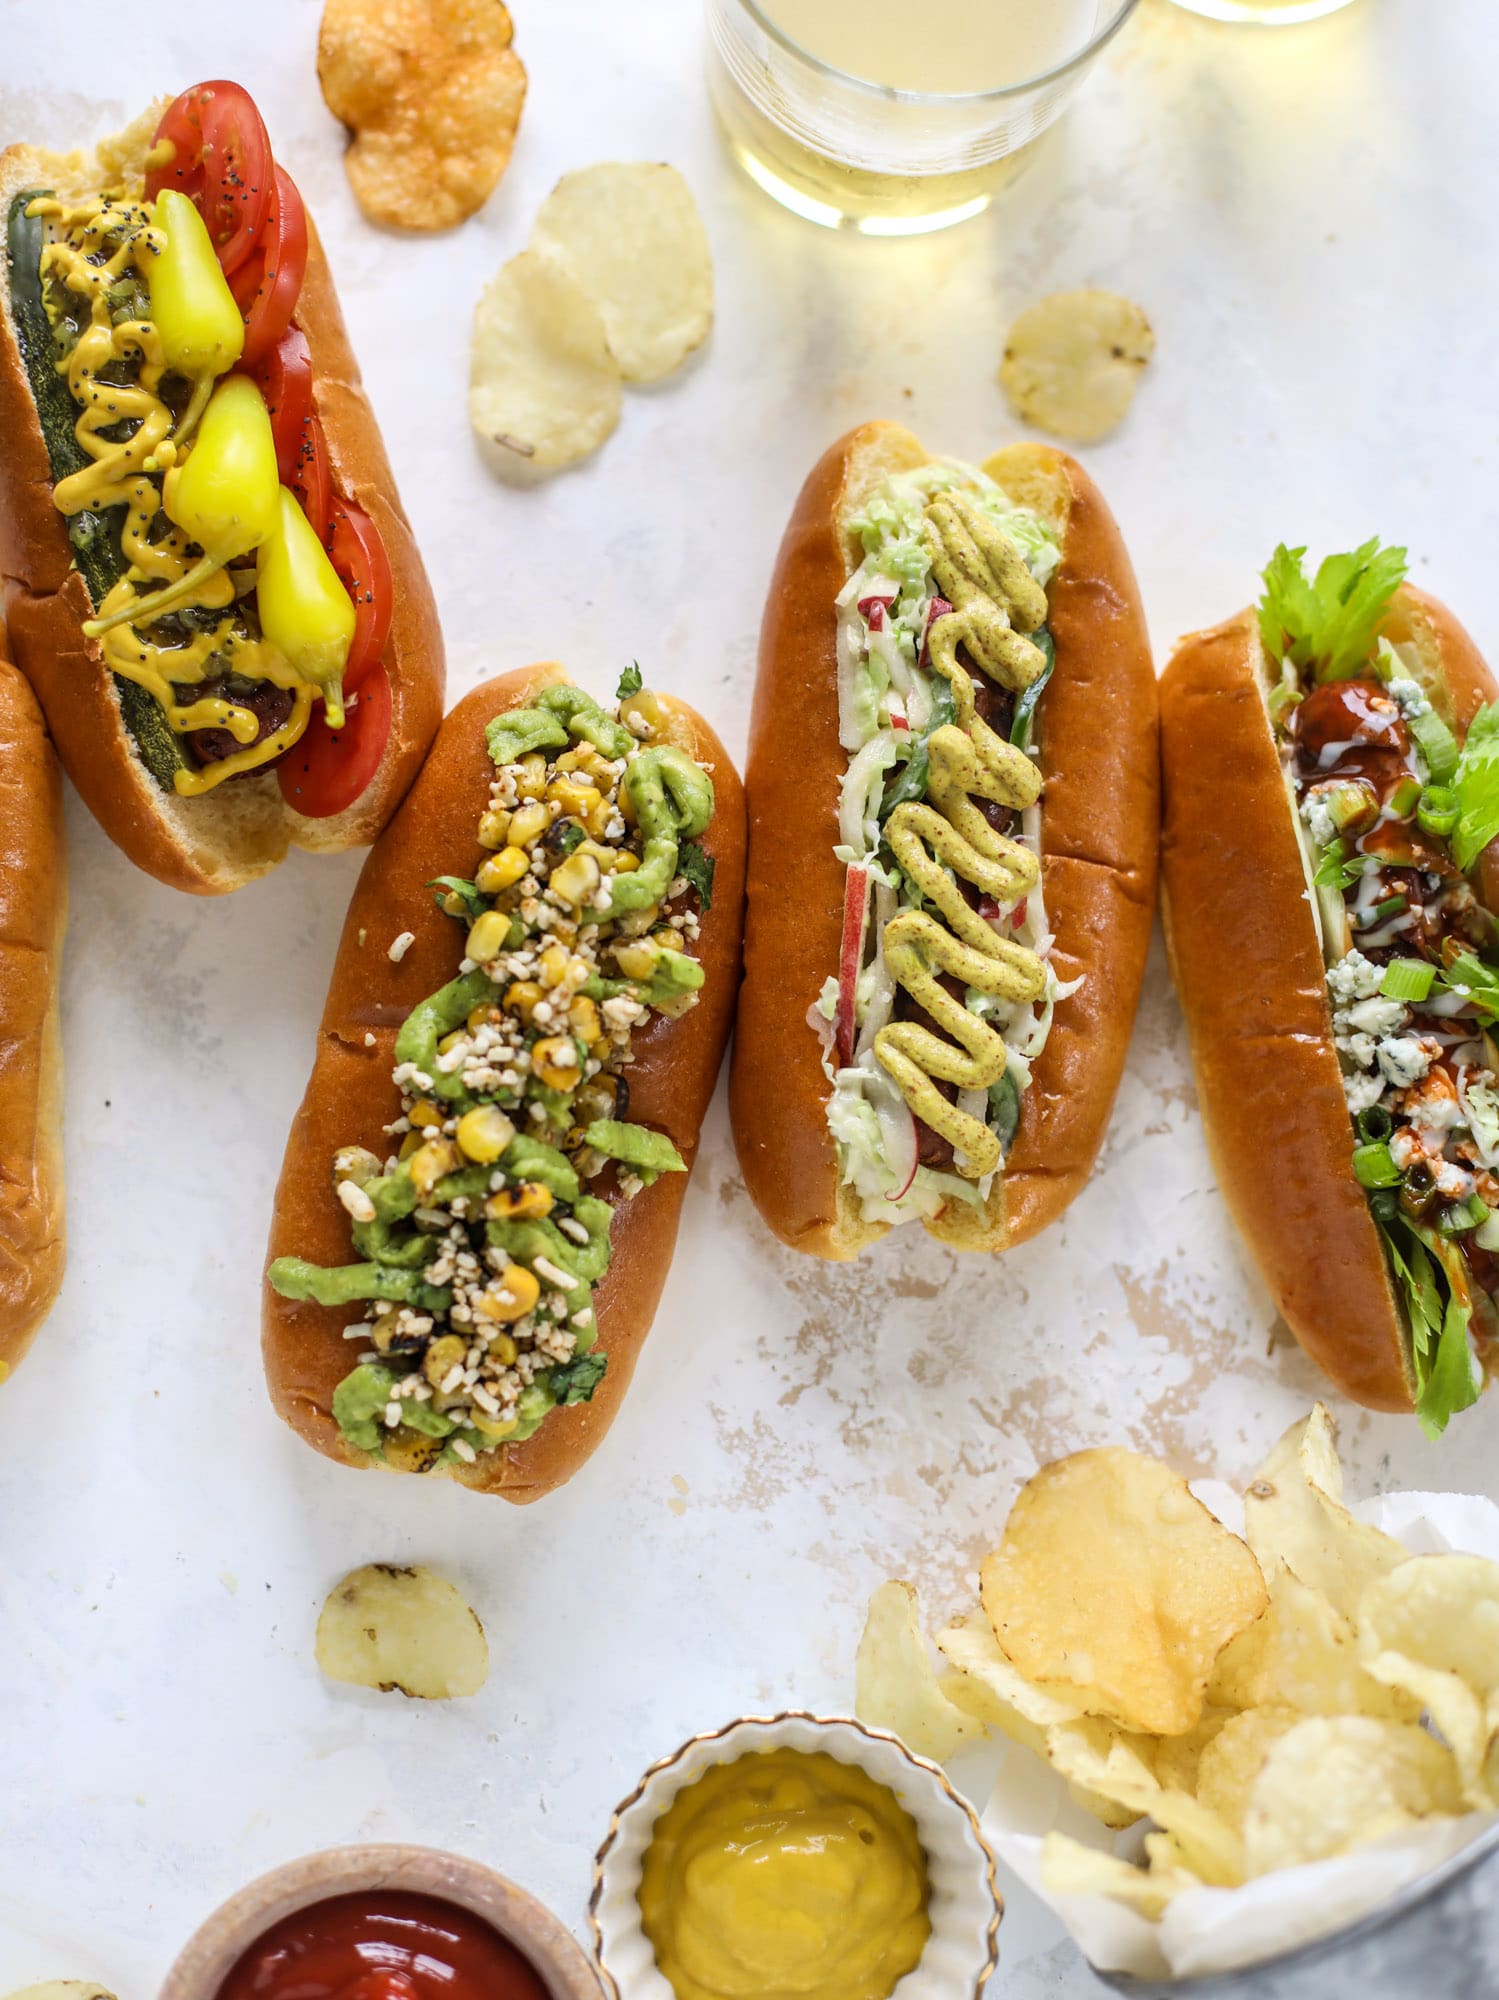 Nothing screams summer more than a hot dog bar! Grab your buns and dogs and a whole lot of toppings. This is super fun and delicious!